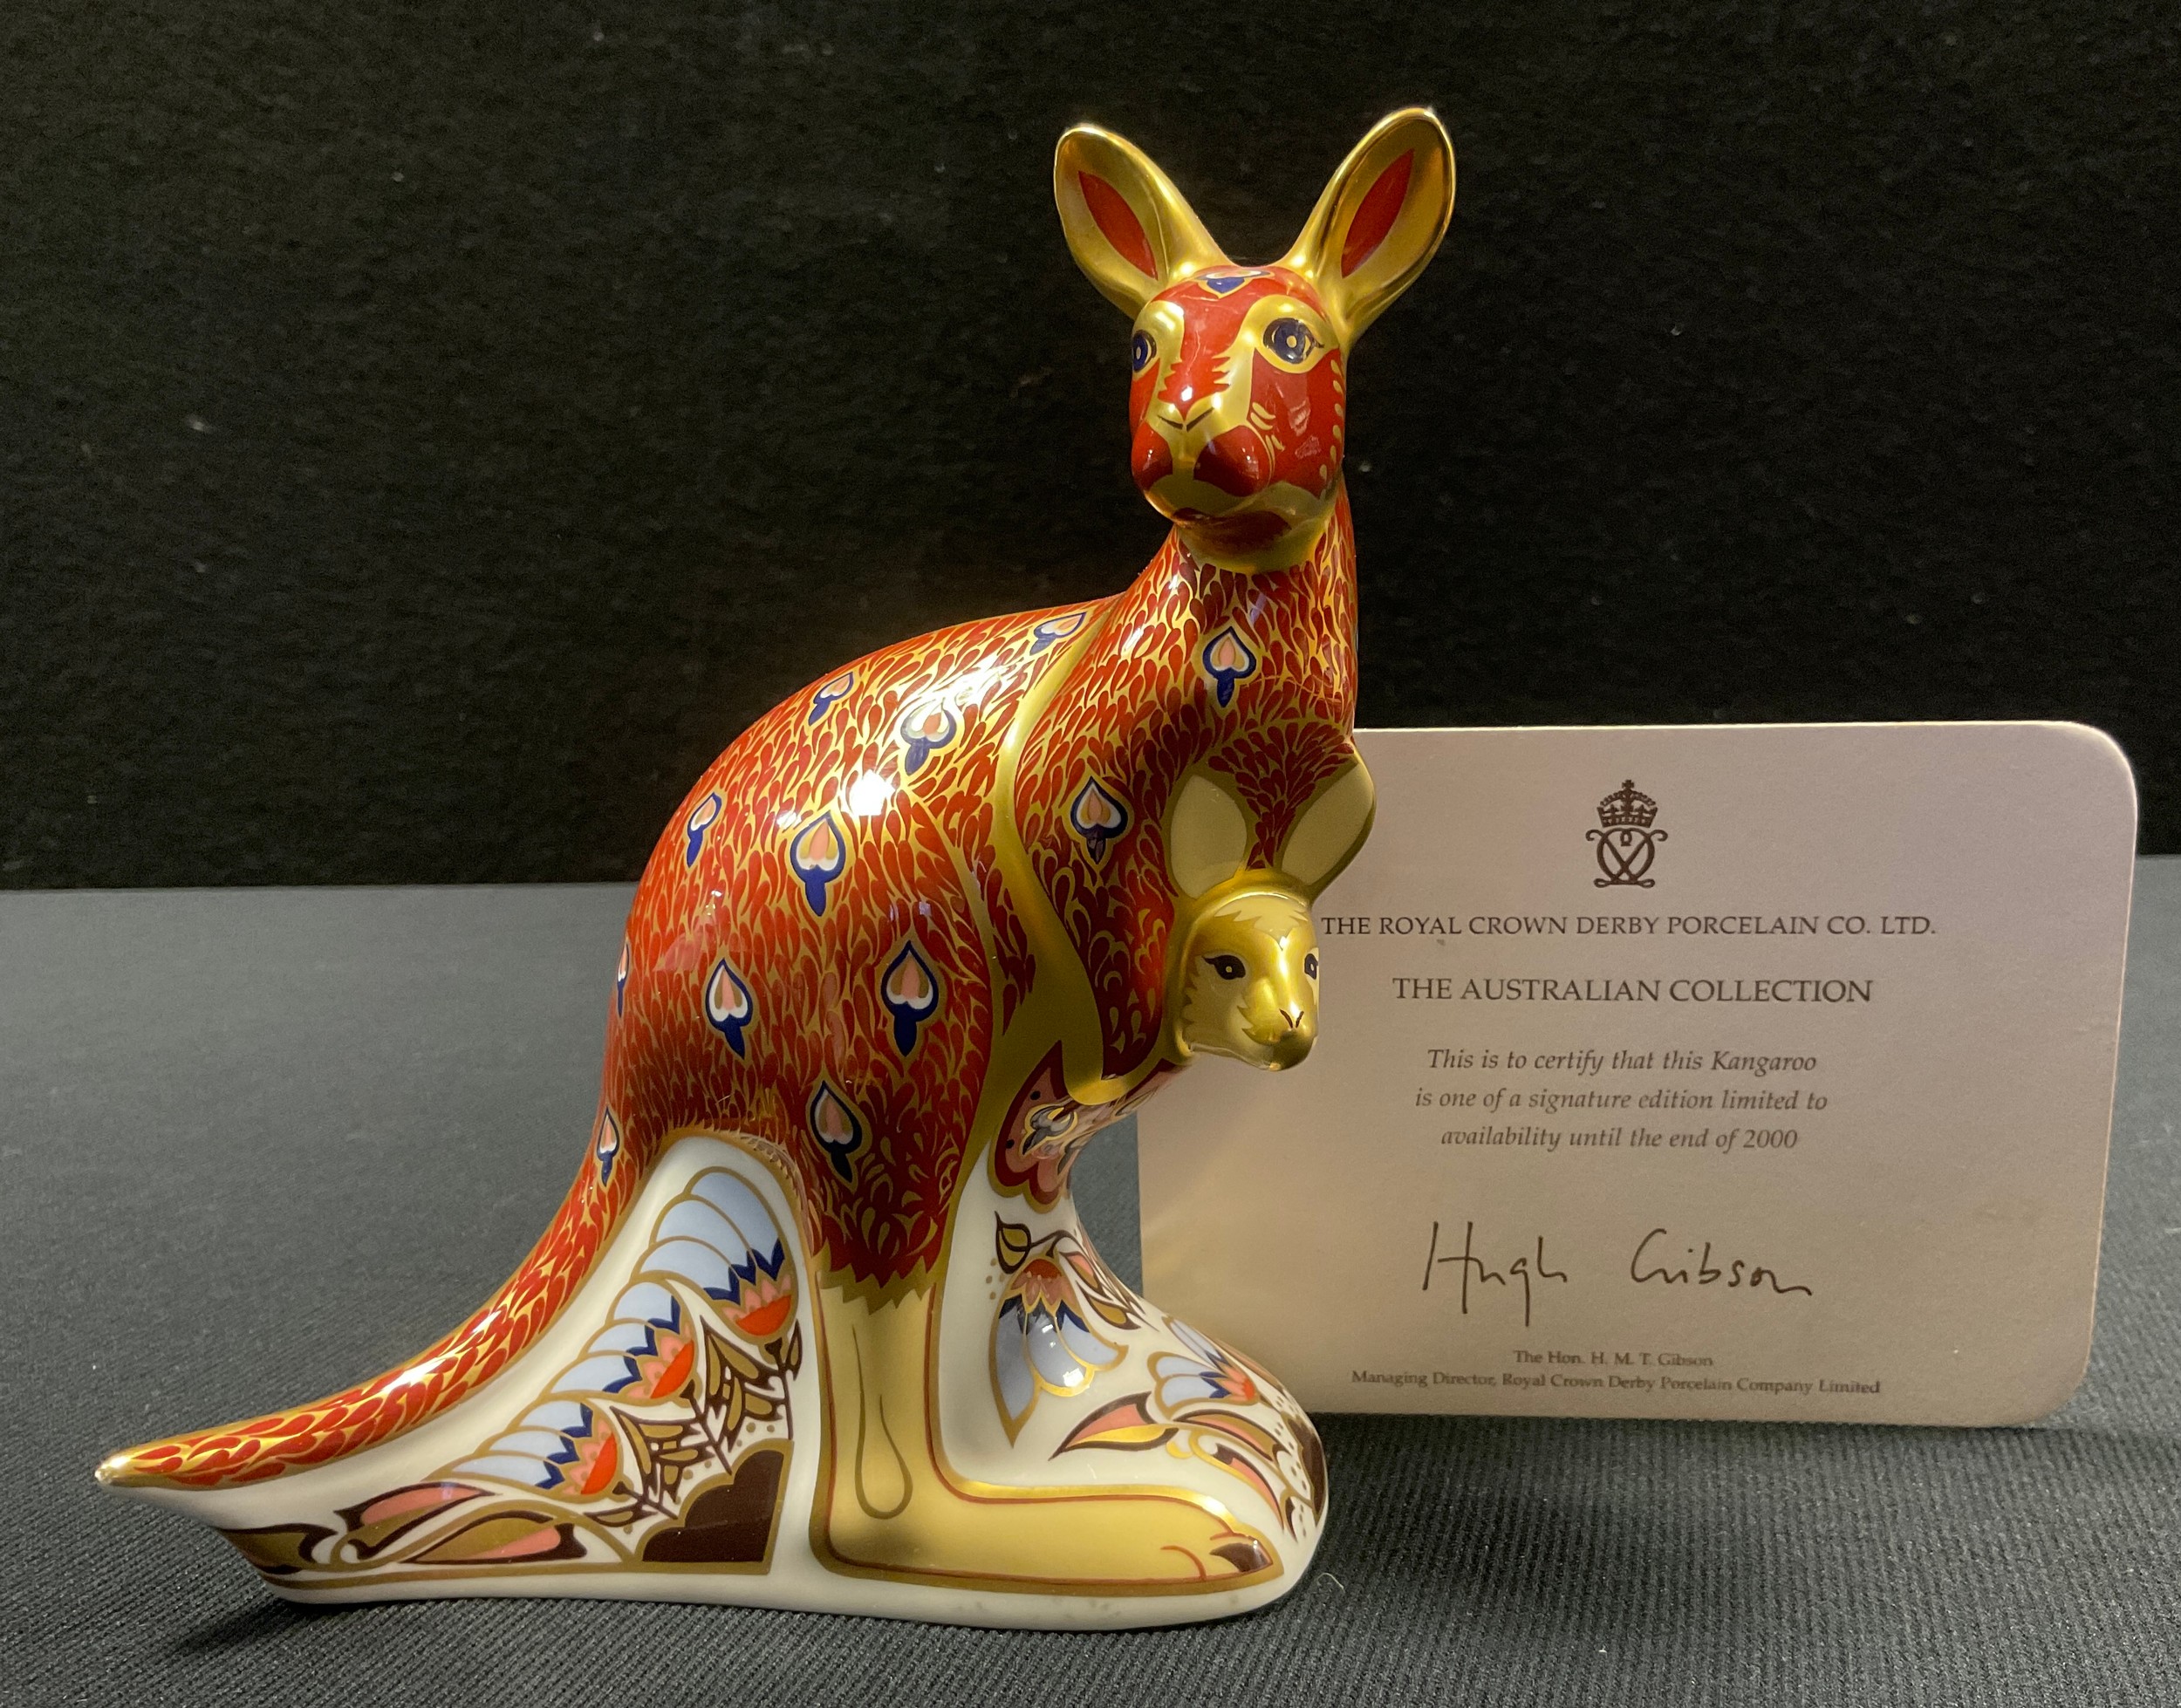 A Royal Crown Derby Paperweight - The Australian Collection - Kangaroo, with certificate, gold